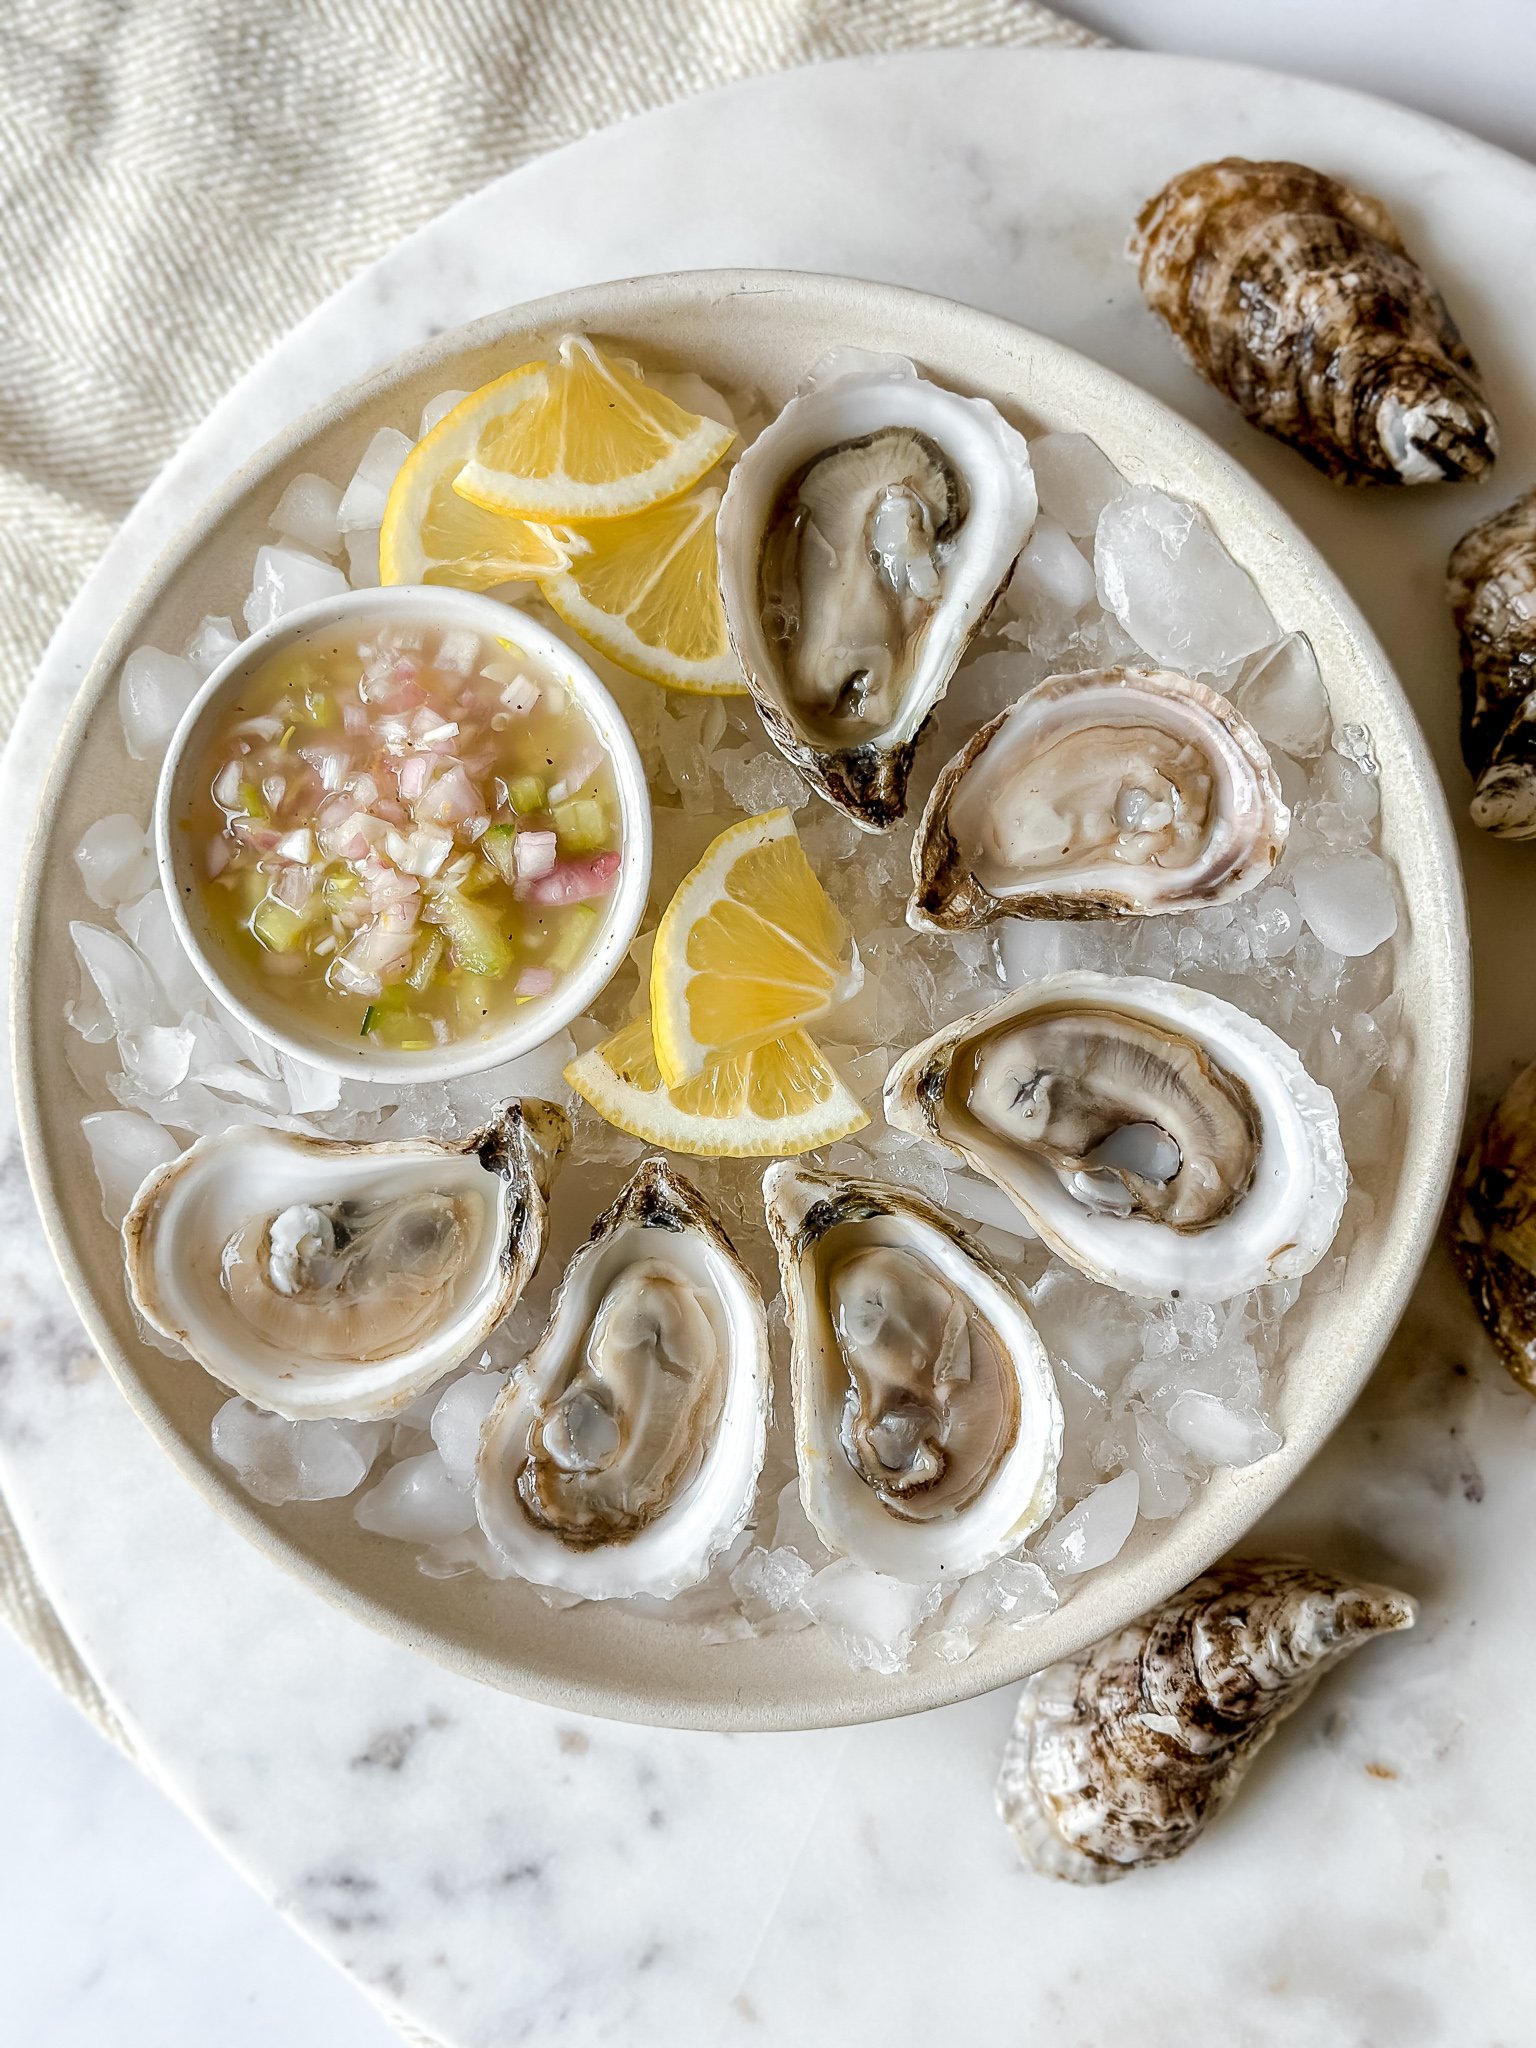 plate of 6 oysters on ice and a small dish of mignonette salsa